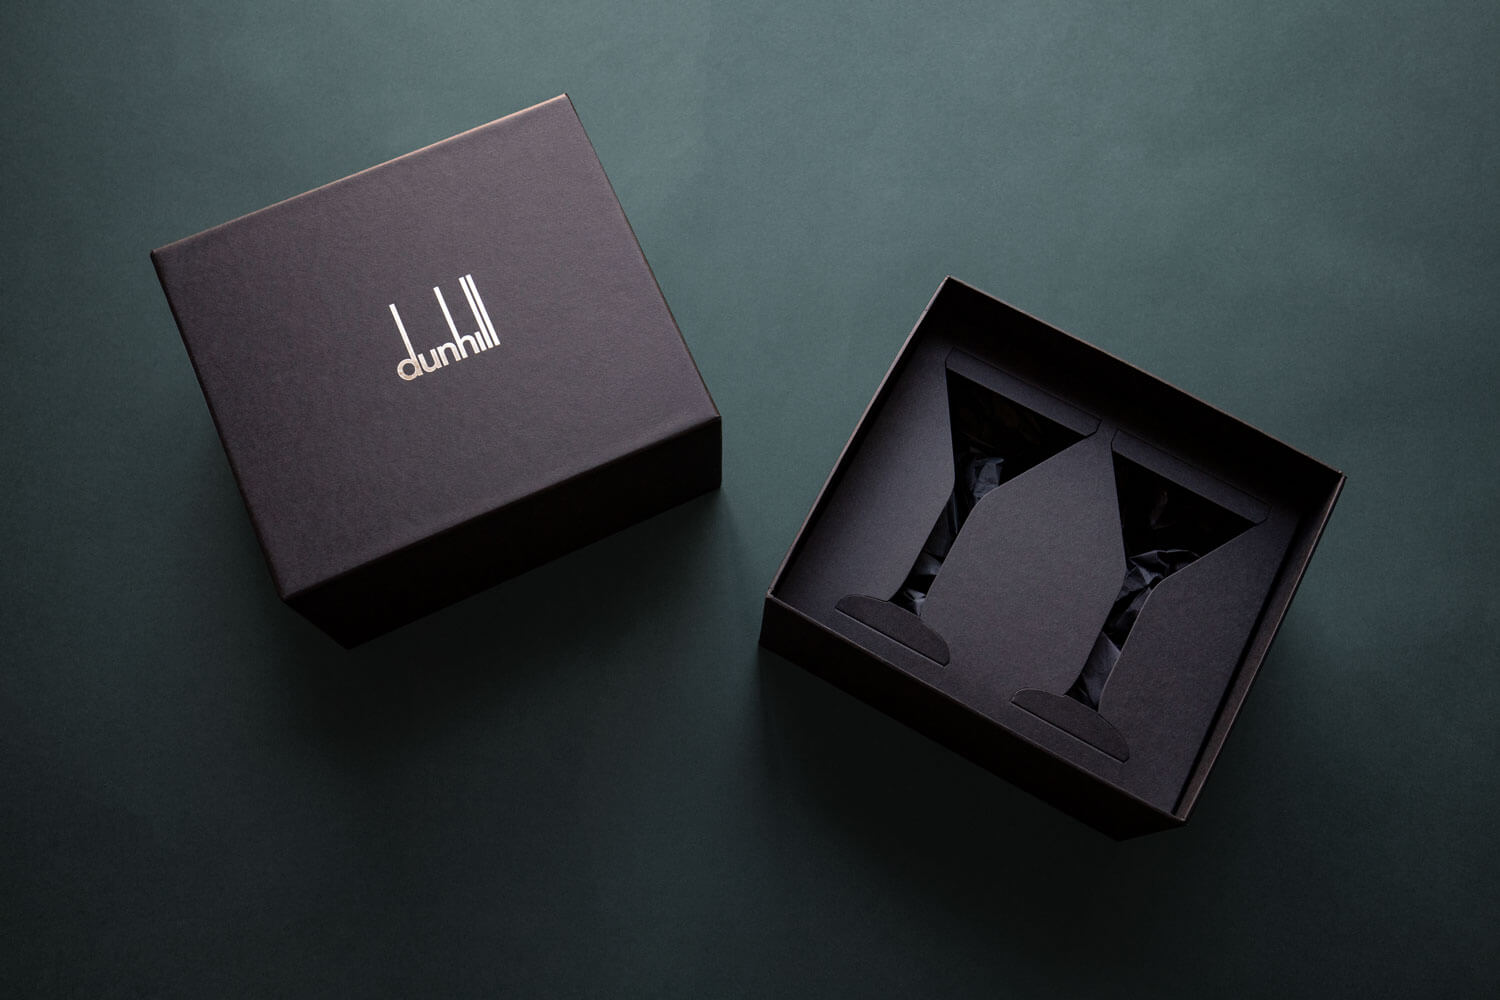 black box with silver stamped logo to hold two bespoke cocktail glasses